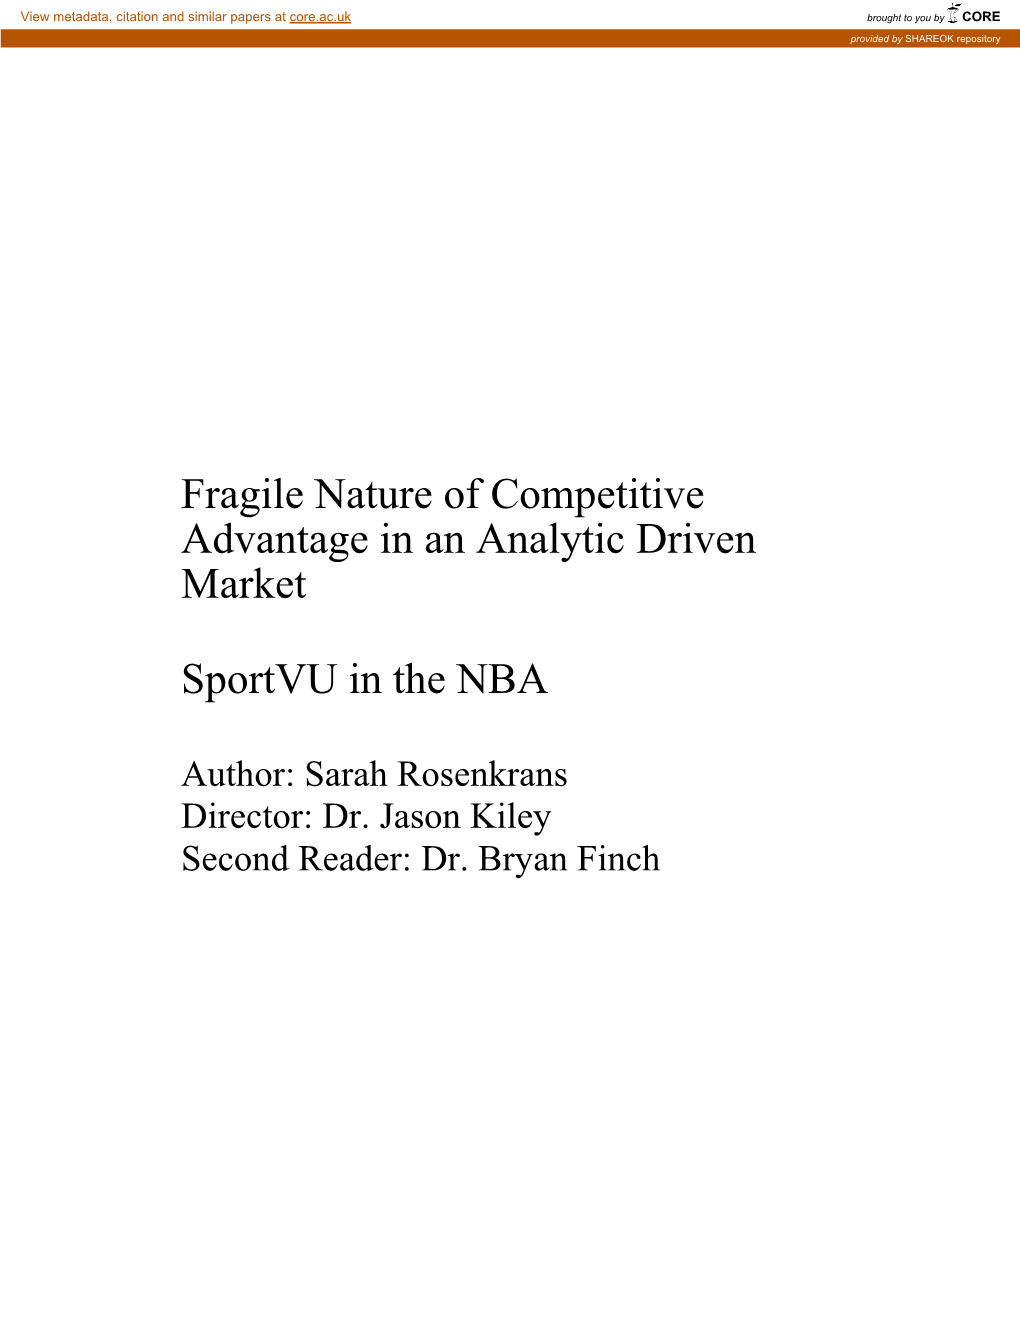 Fragile Nature of Competitive Advantage in an Analytic Driven Market